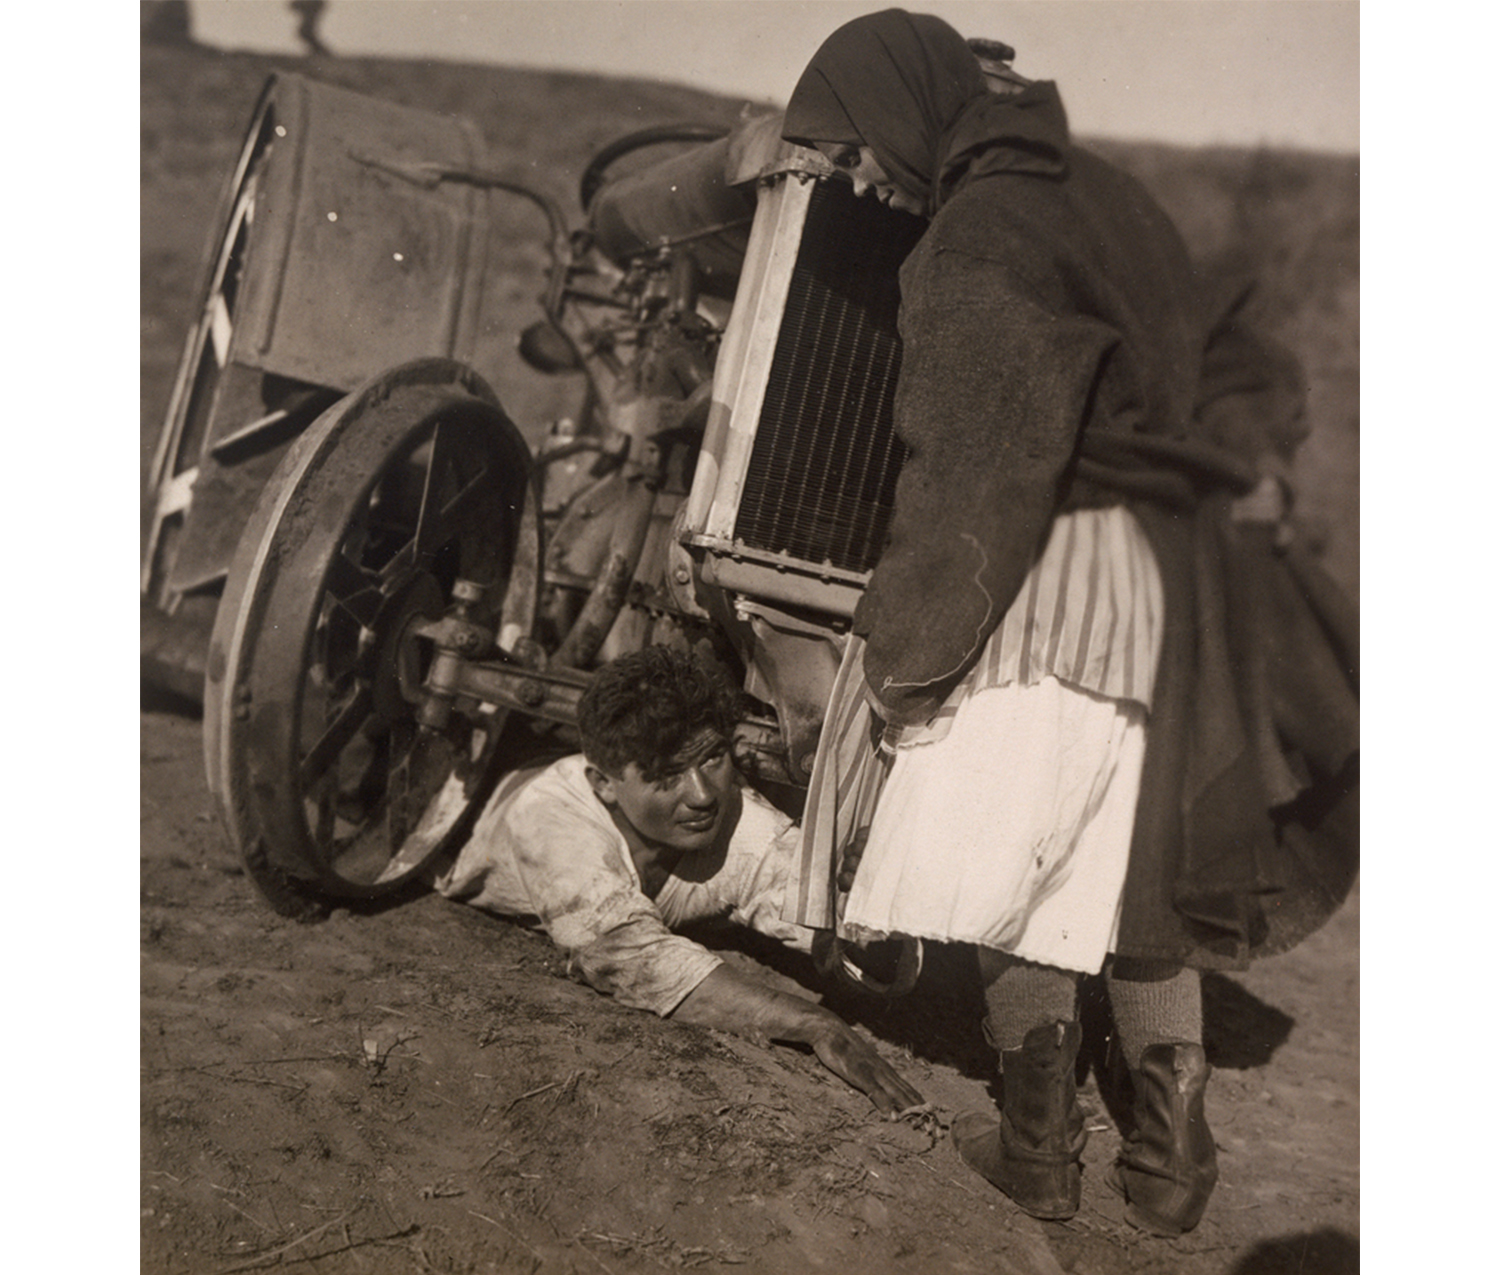 woman standing and man on the ground, under a wheel in a pit of dirt